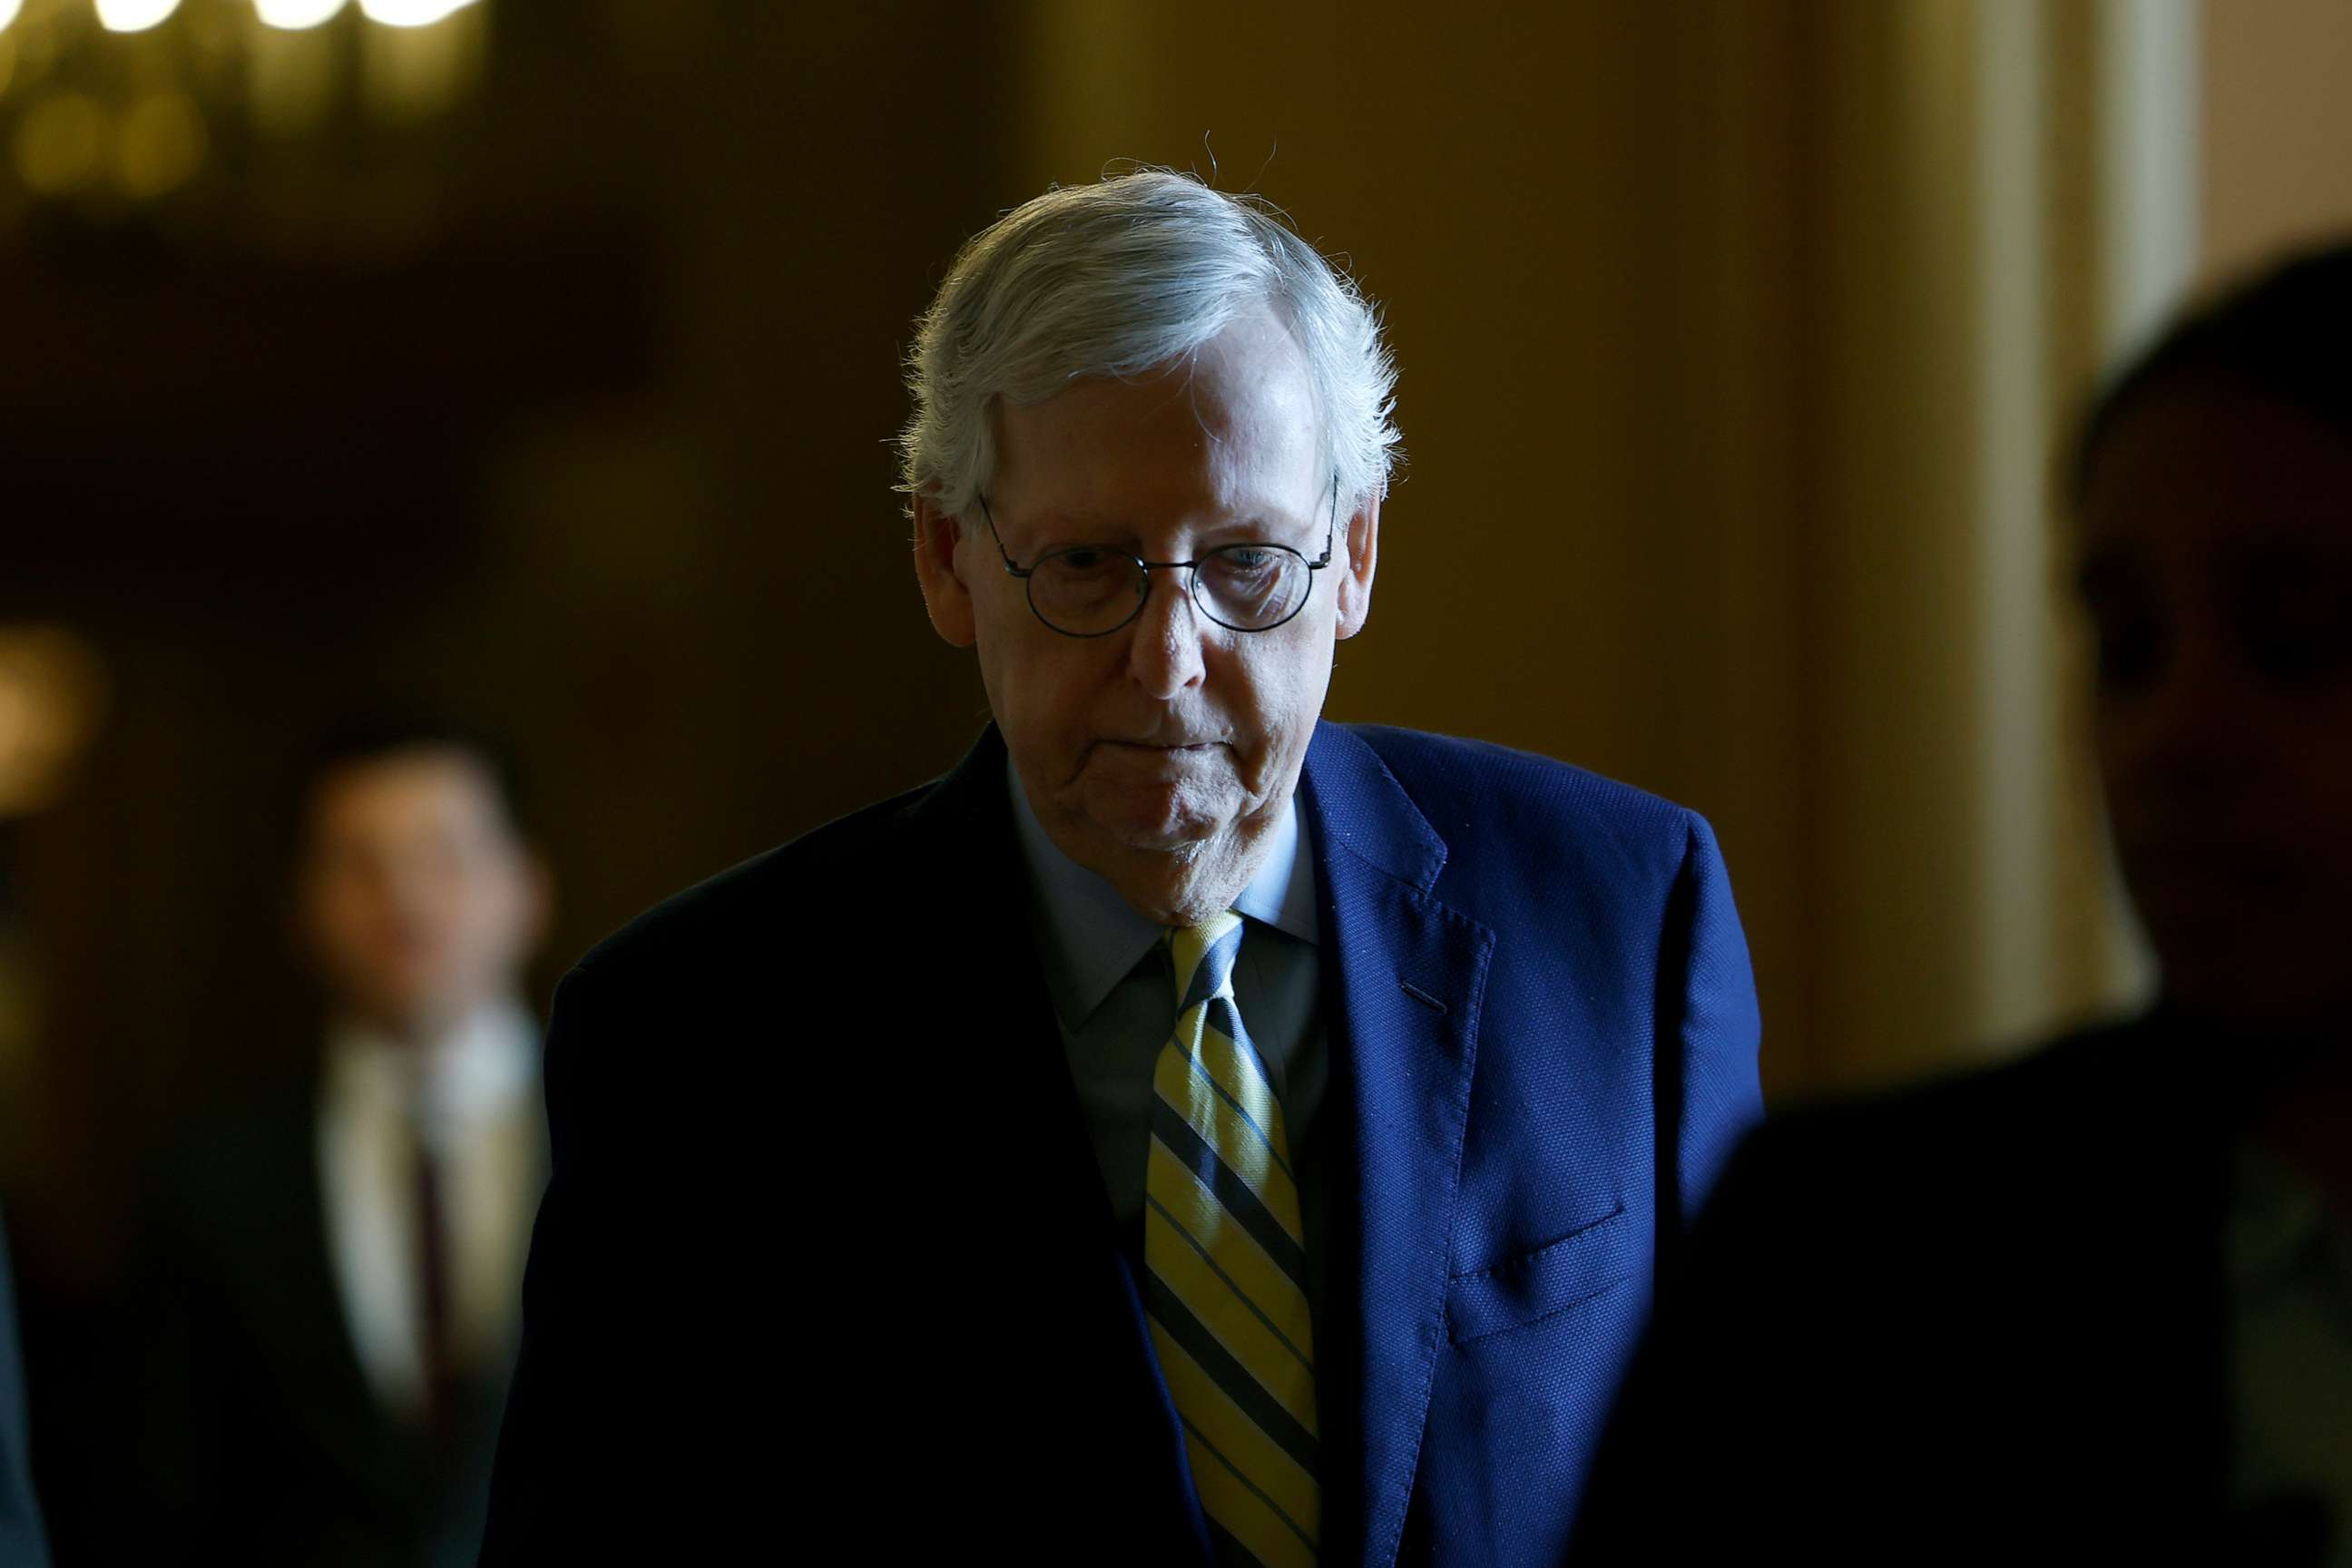 PHOTO: Senate Minority Leader Mitch McConnell walks to the Senate Chambers at the U.S. Capitol Building, April 17, 2023, in Washington.